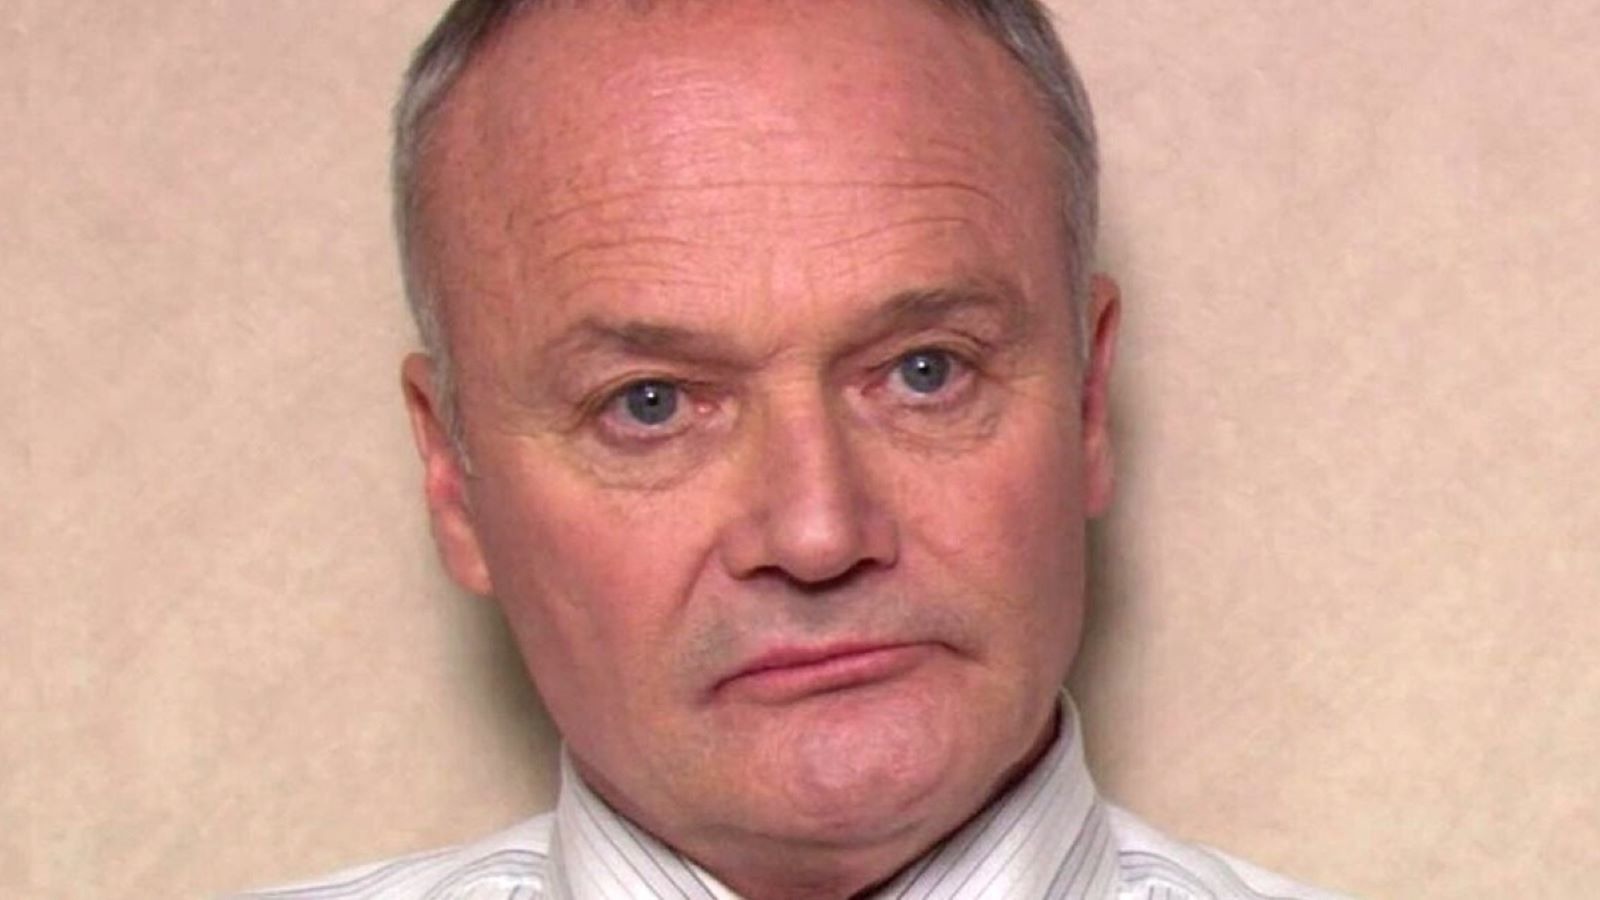 Creed Bratton's Original Role On The Office Was Much Different